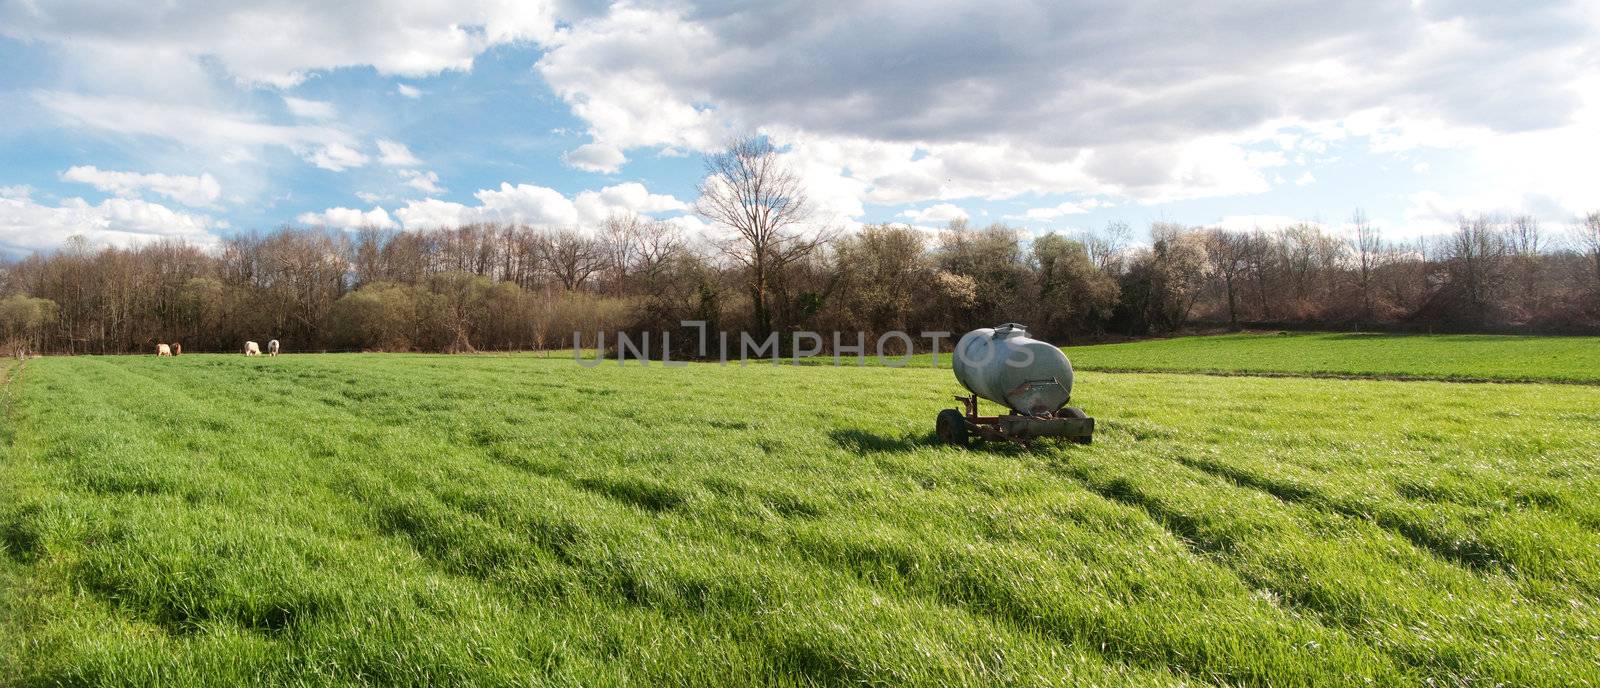 Panoramic view of  a metallic waterer in the middle of a fresh green field of grass